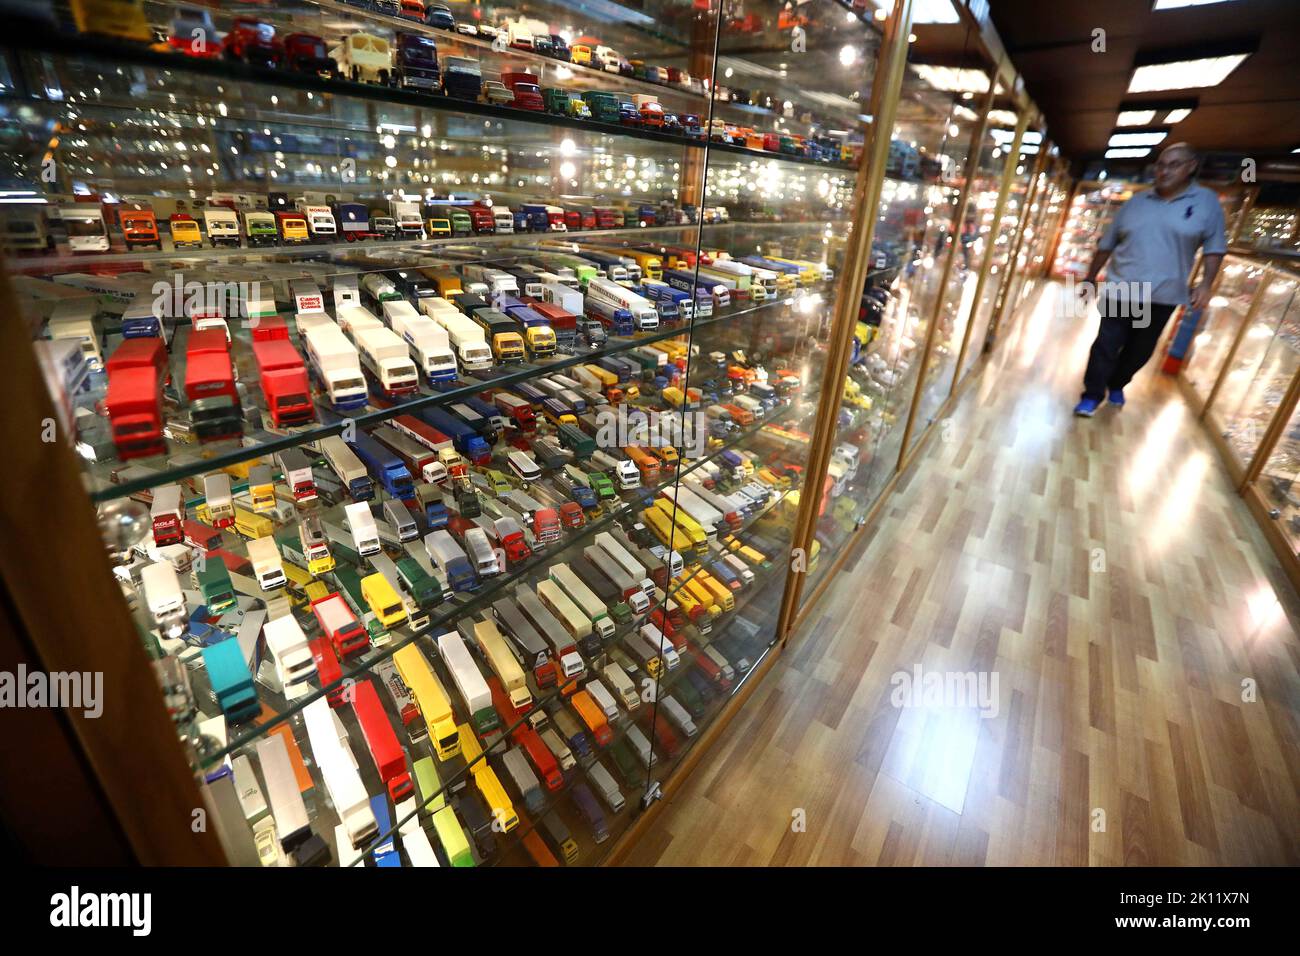 Beirut. 12th Sep, 2022. Photo taken on Sept. 12, 2022 shows model cars displayed at the Billy Karam Museum in Zouk Mosbeh, Lebanon. Lebanese race car champion Nabil Karam started his hobby of collecting mini sports cars 30 years ago. Today, the 65-year-old man has collected around 50,000 car miniatures from around the world. TO GO WITH 'Feature: Lebanese racer turns hobby into car museum' Credit: Bilal Jawich/Xinhua/Alamy Live News Stock Photo